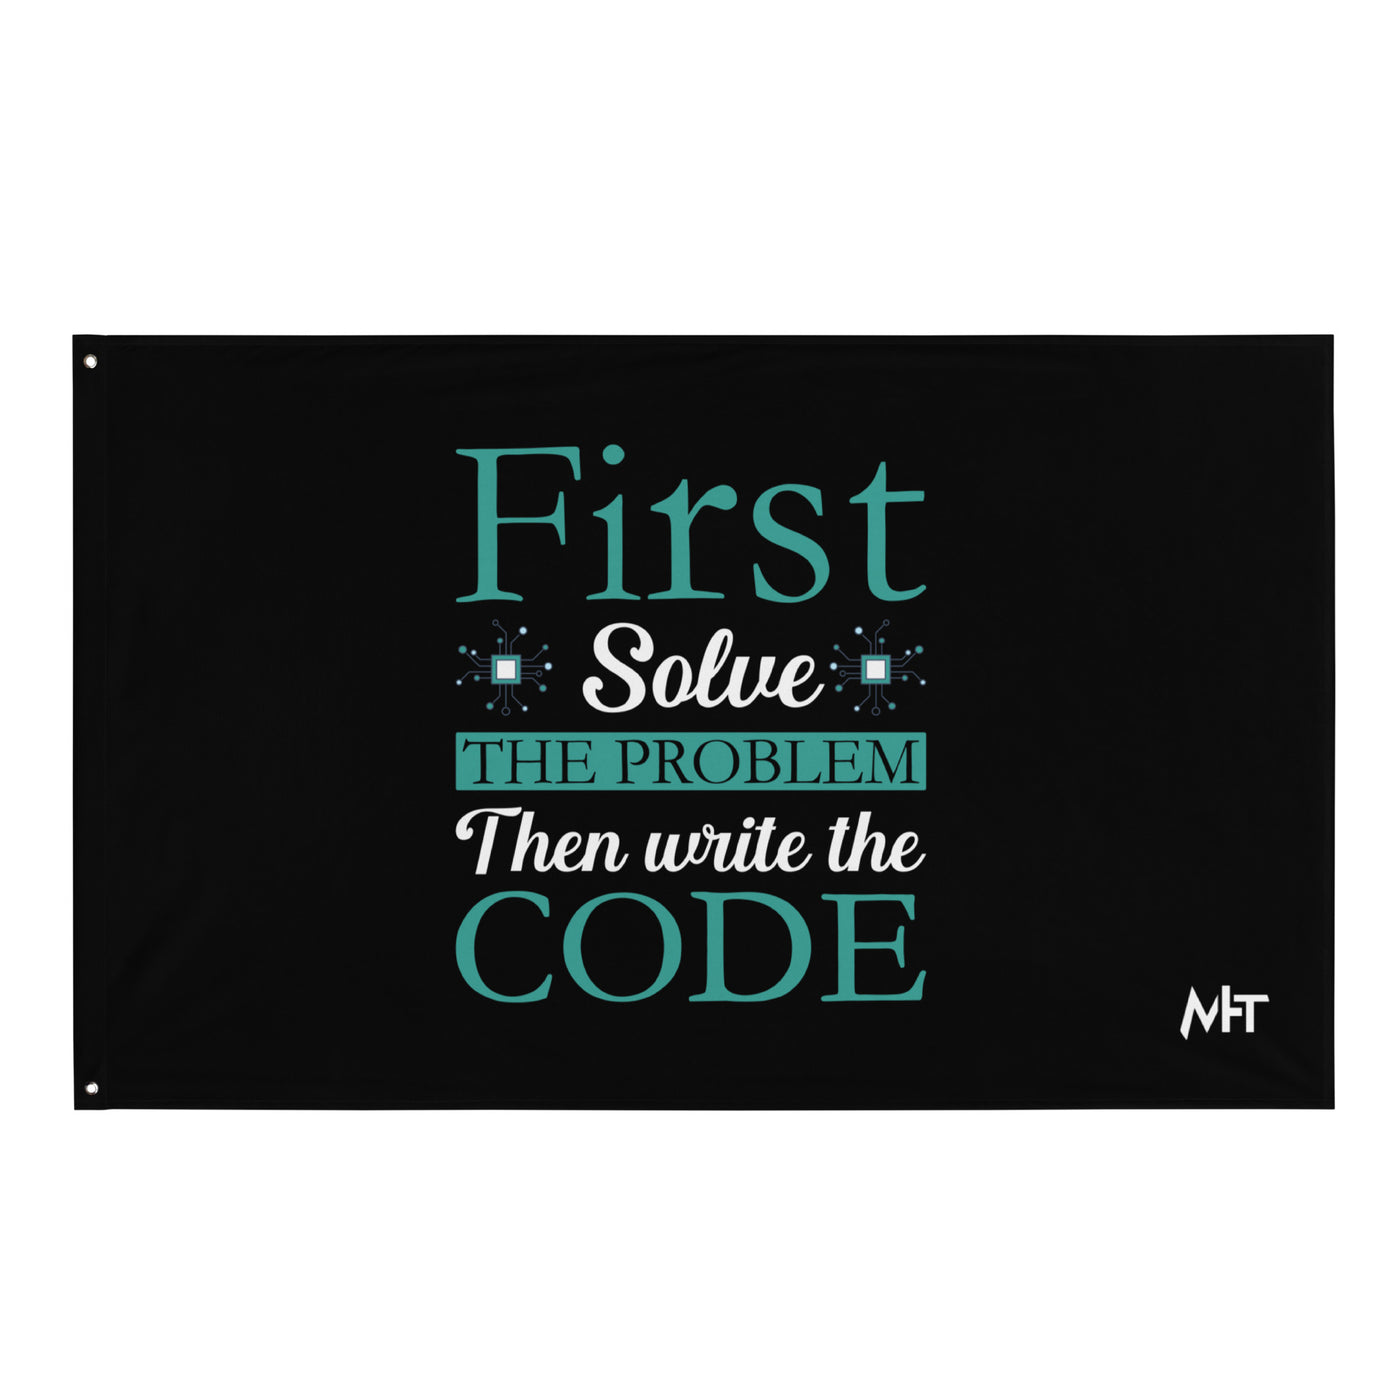 First, Solve the problem; then, Write the code V3 - Flag